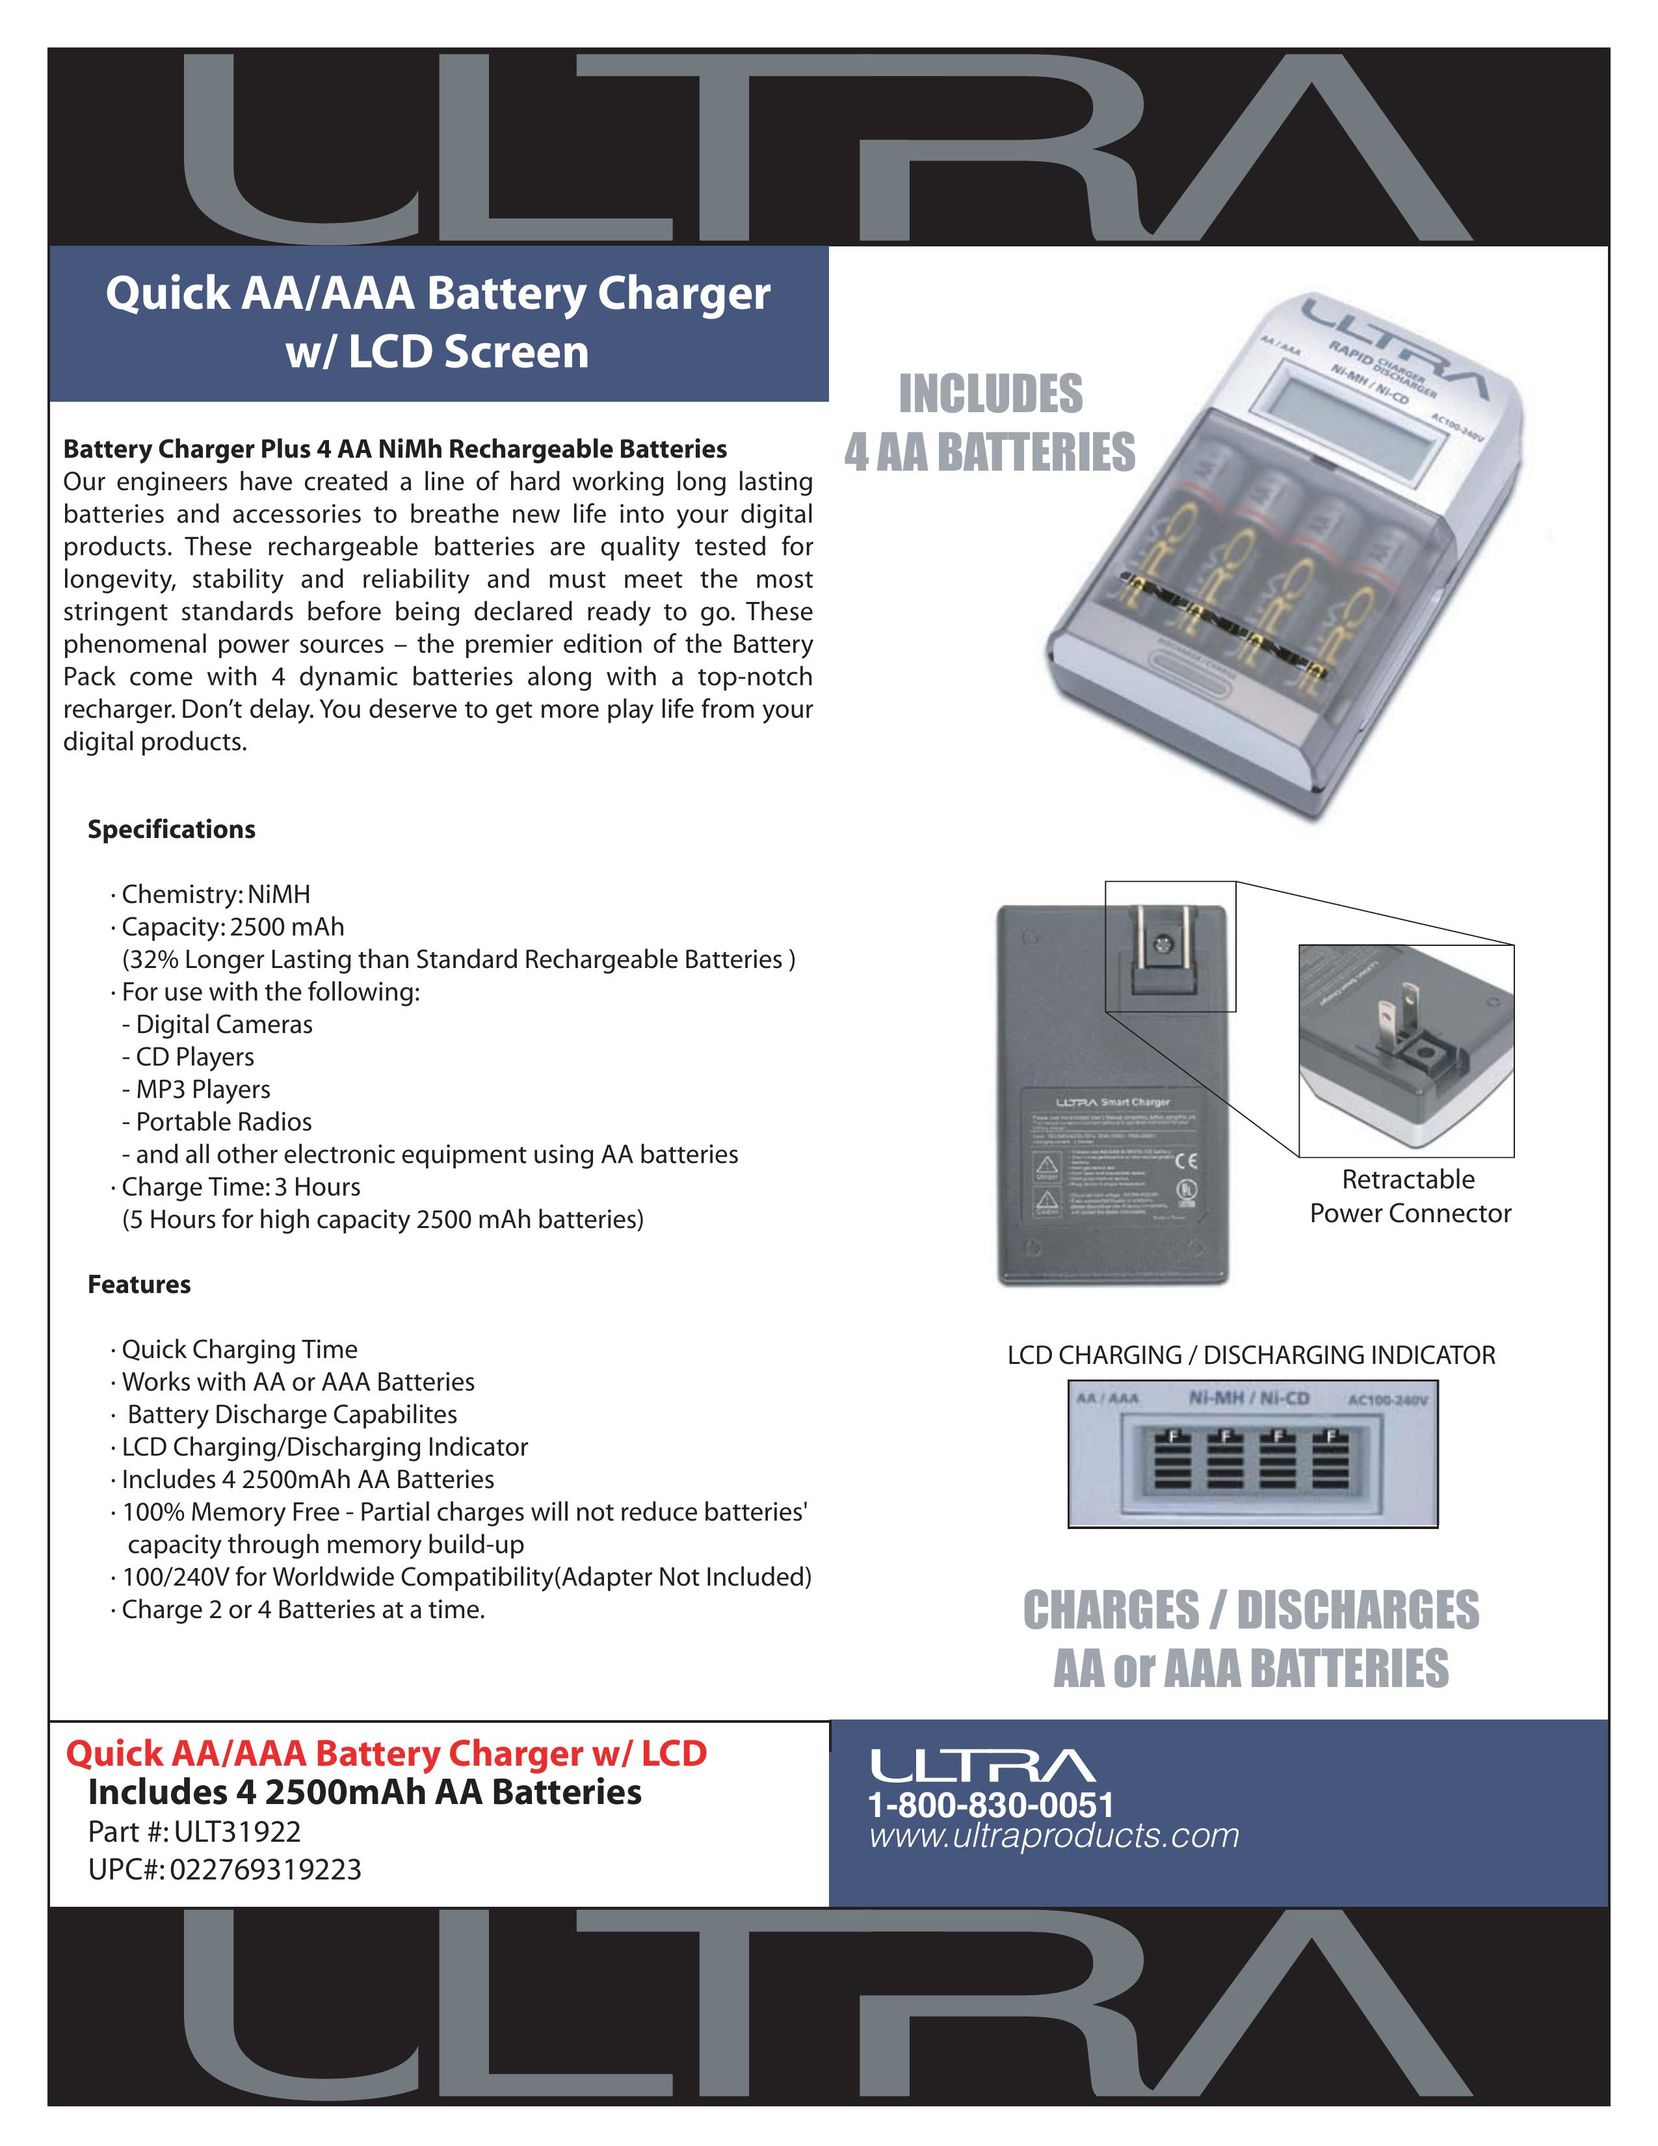 Ultra Products ULT31922 Battery Charger User Manual